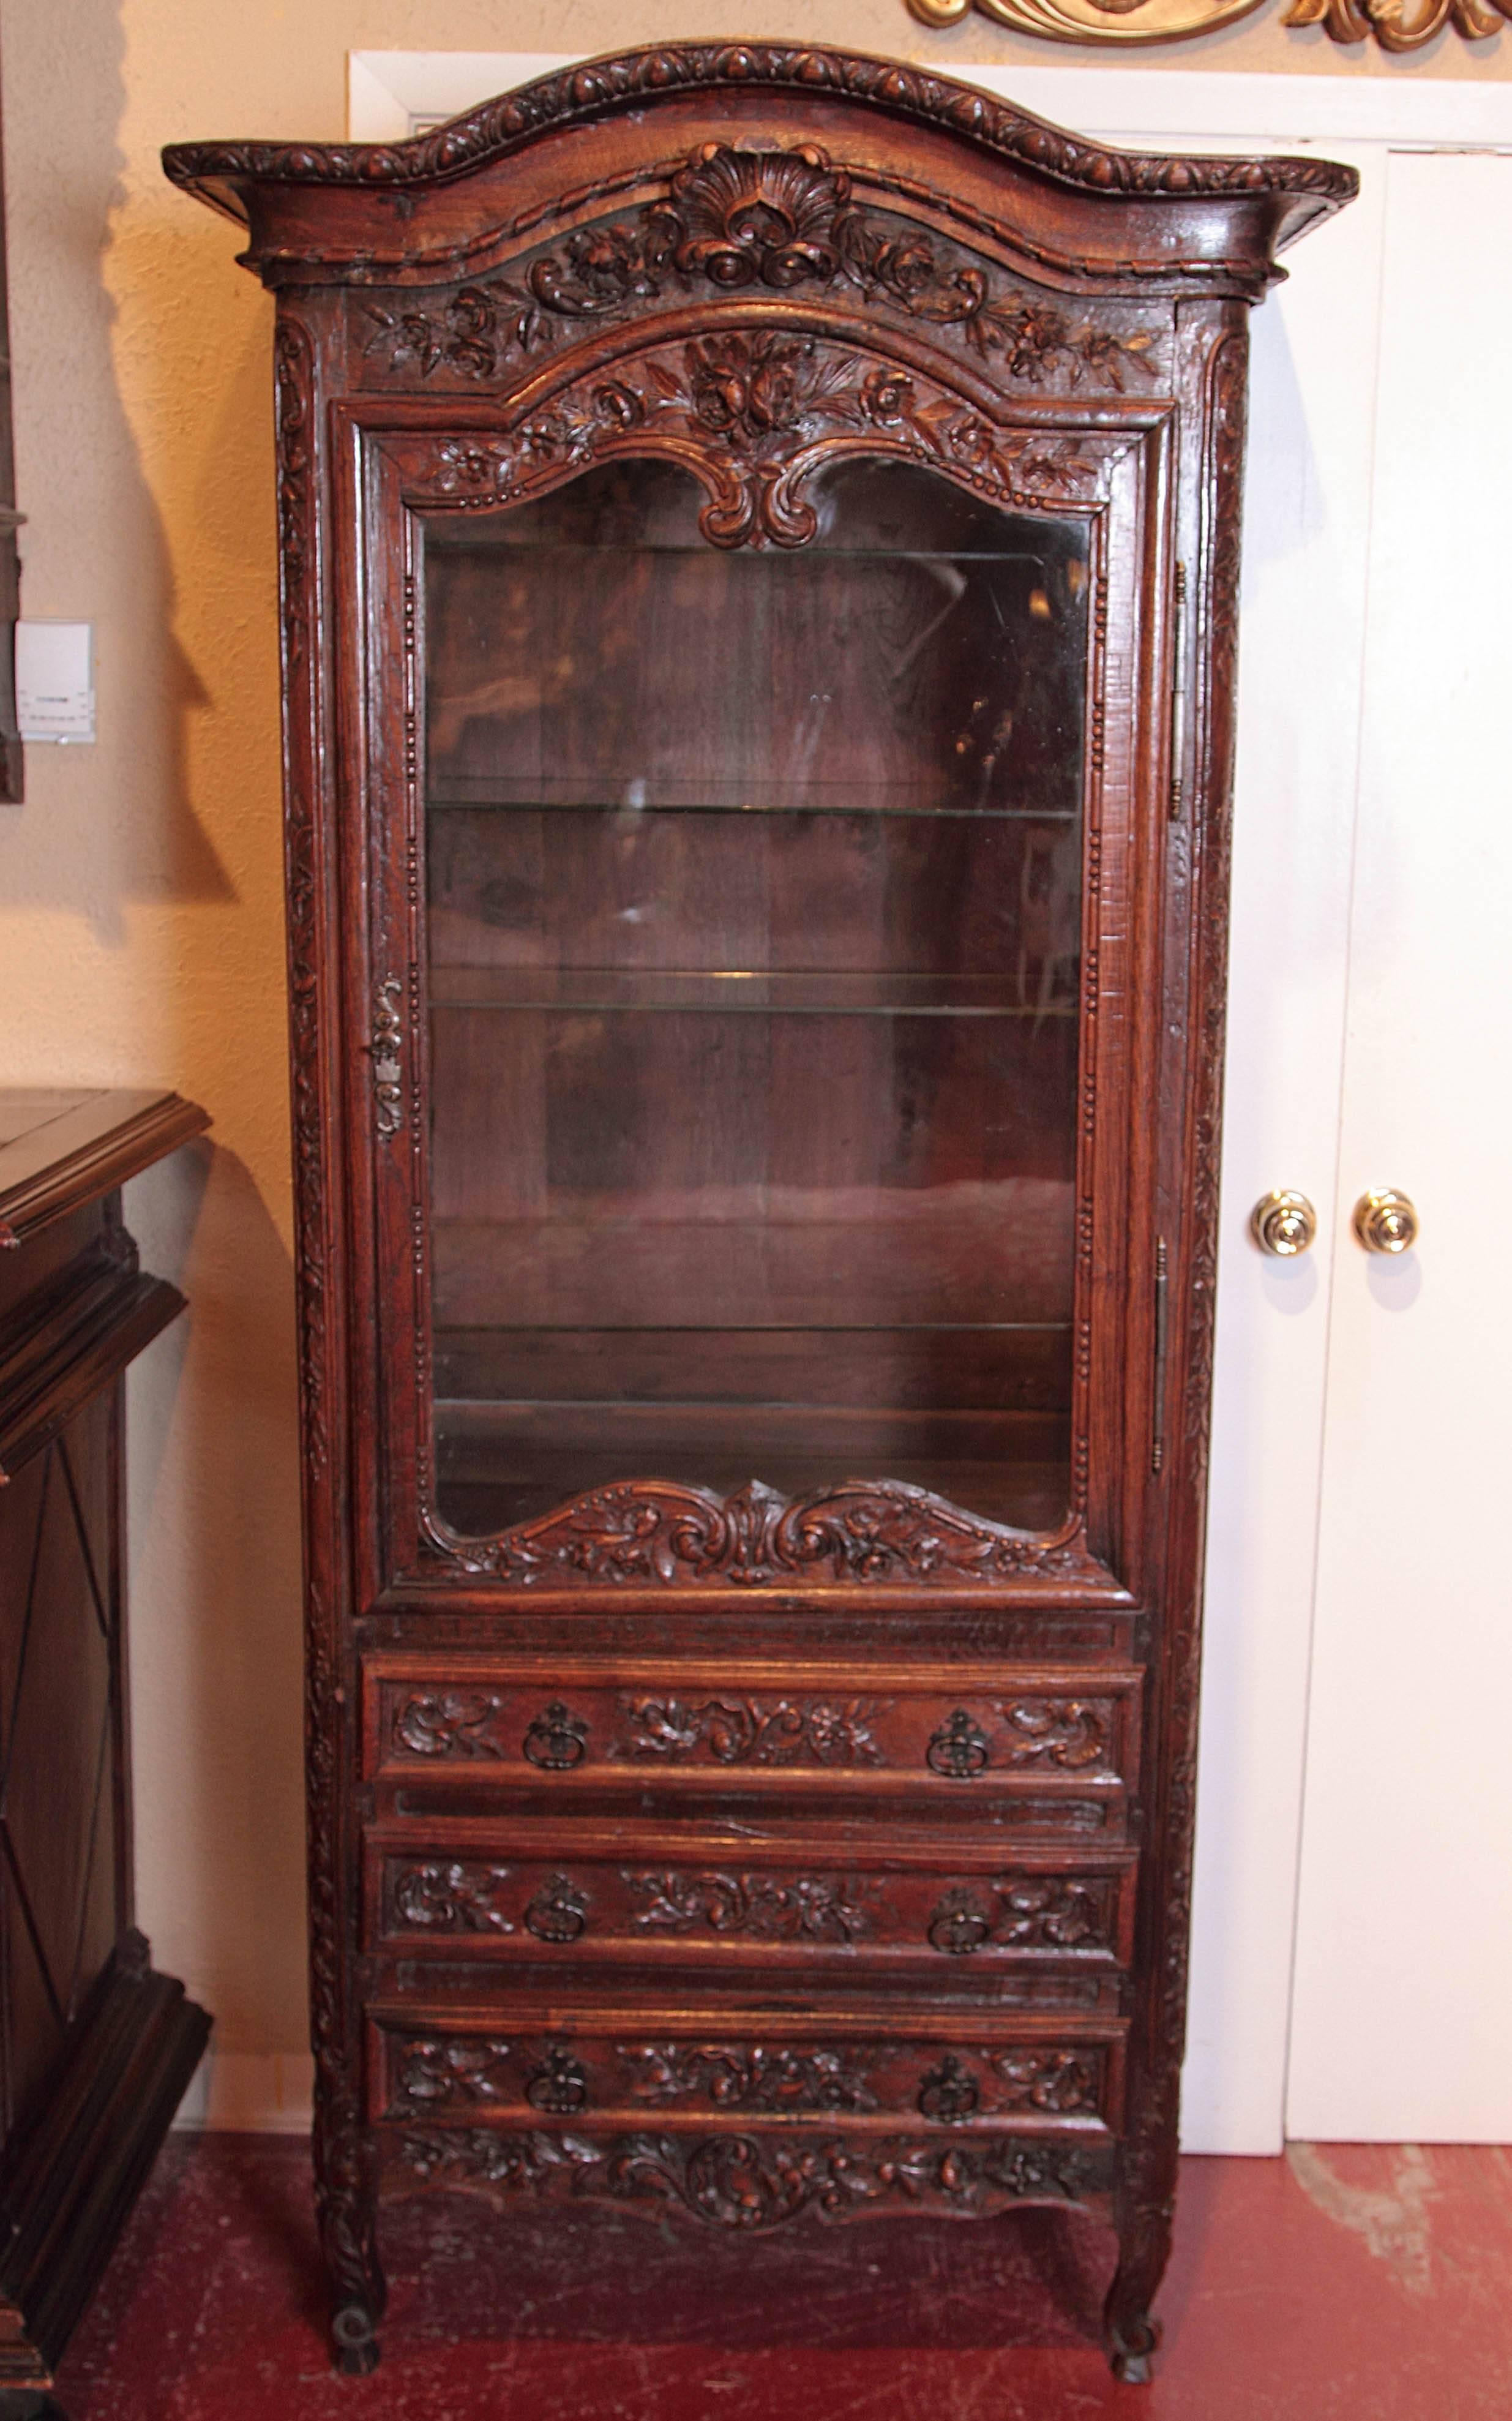 Display a treasured collection inside this beautifully hand-carved antique display cabinet from Normandy, France. Crafted circa 1790, the vitrine with bonnet top sits on small scrolled feet and features a glass door across the front revealing four